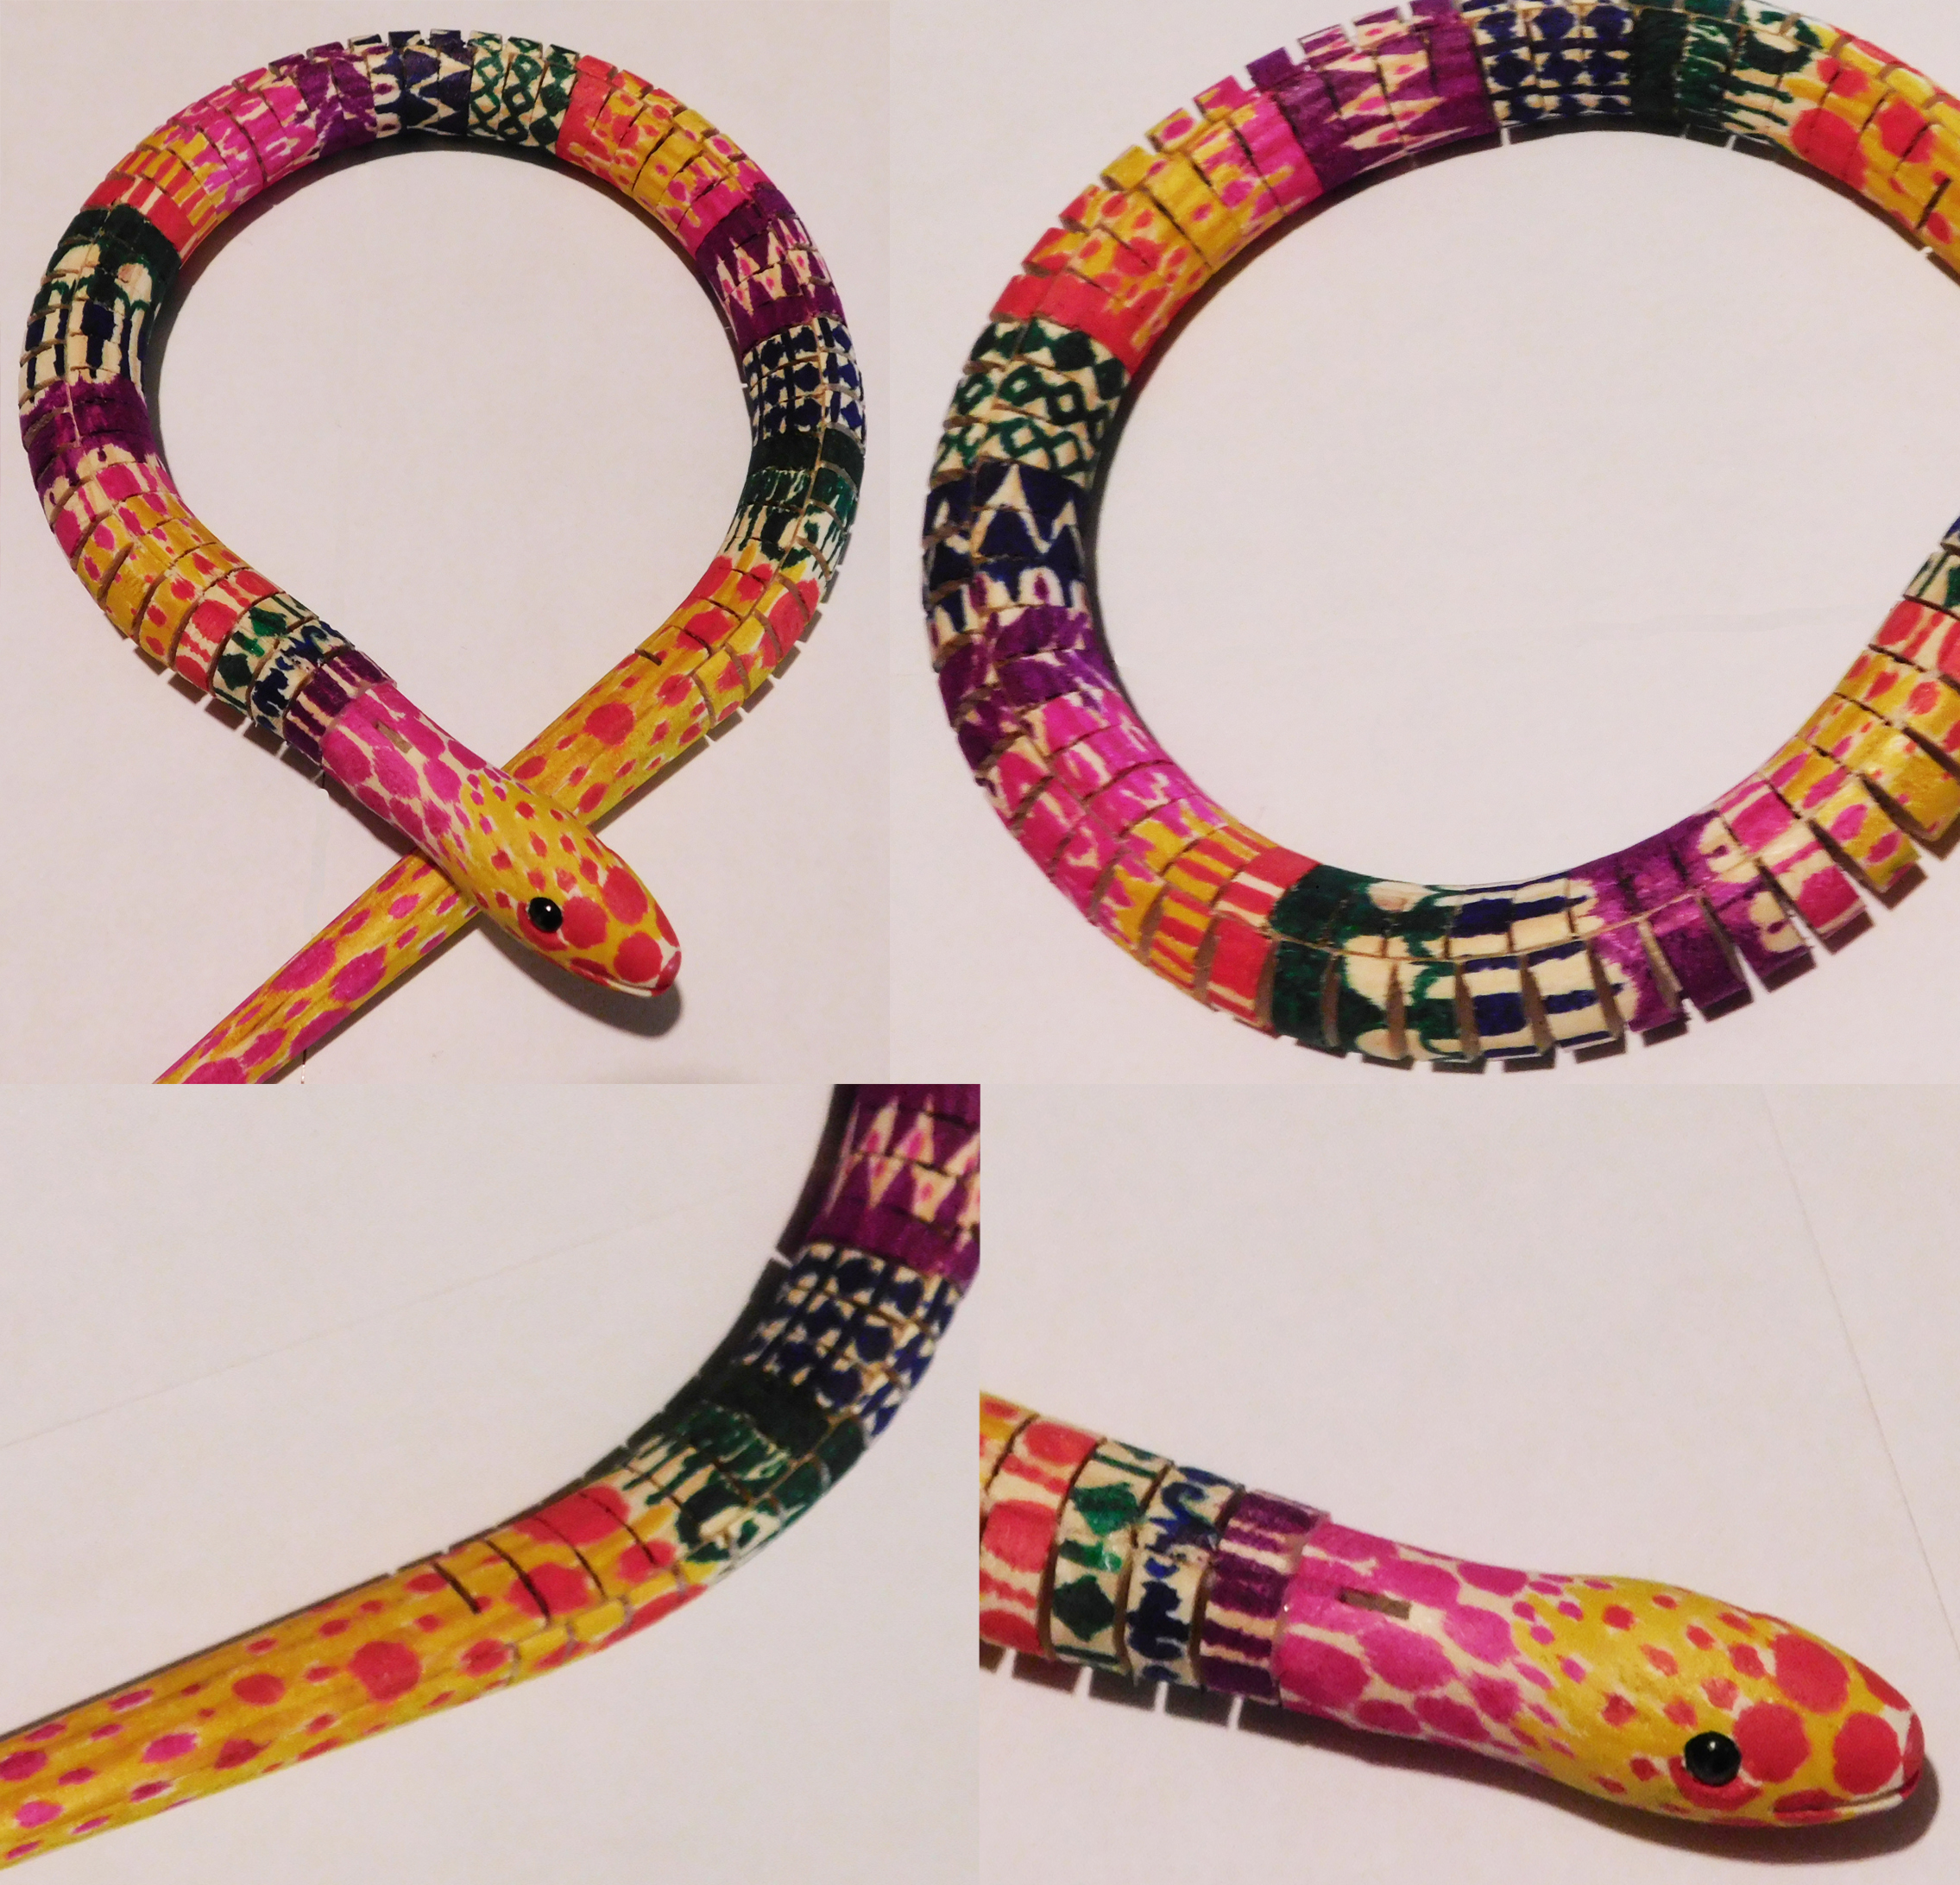 This Colorful Hand Painted Wooden Snake - One of a kind - Reticulated is made with love by The Creative Soul Sisters! Shop more unique gift ideas today with Spots Initiatives, the best way to support creators.